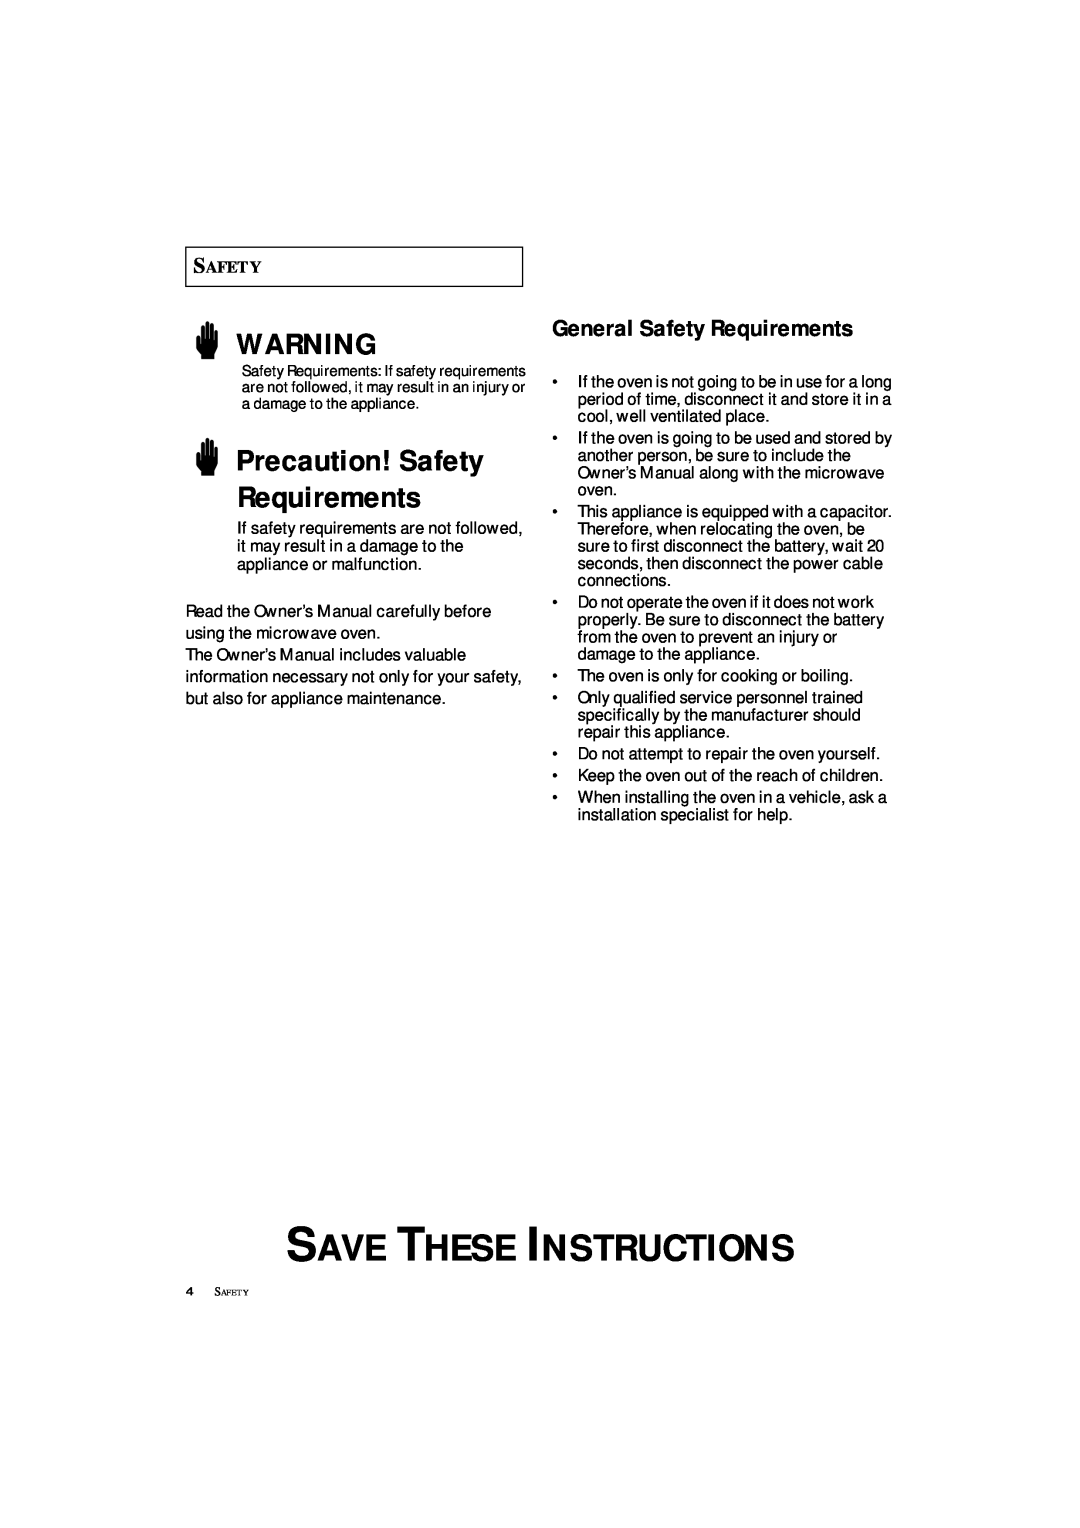 Samsung DE7711 manual Precaution! Safety Requirements, General Safety Requirements, Save These Instructions 